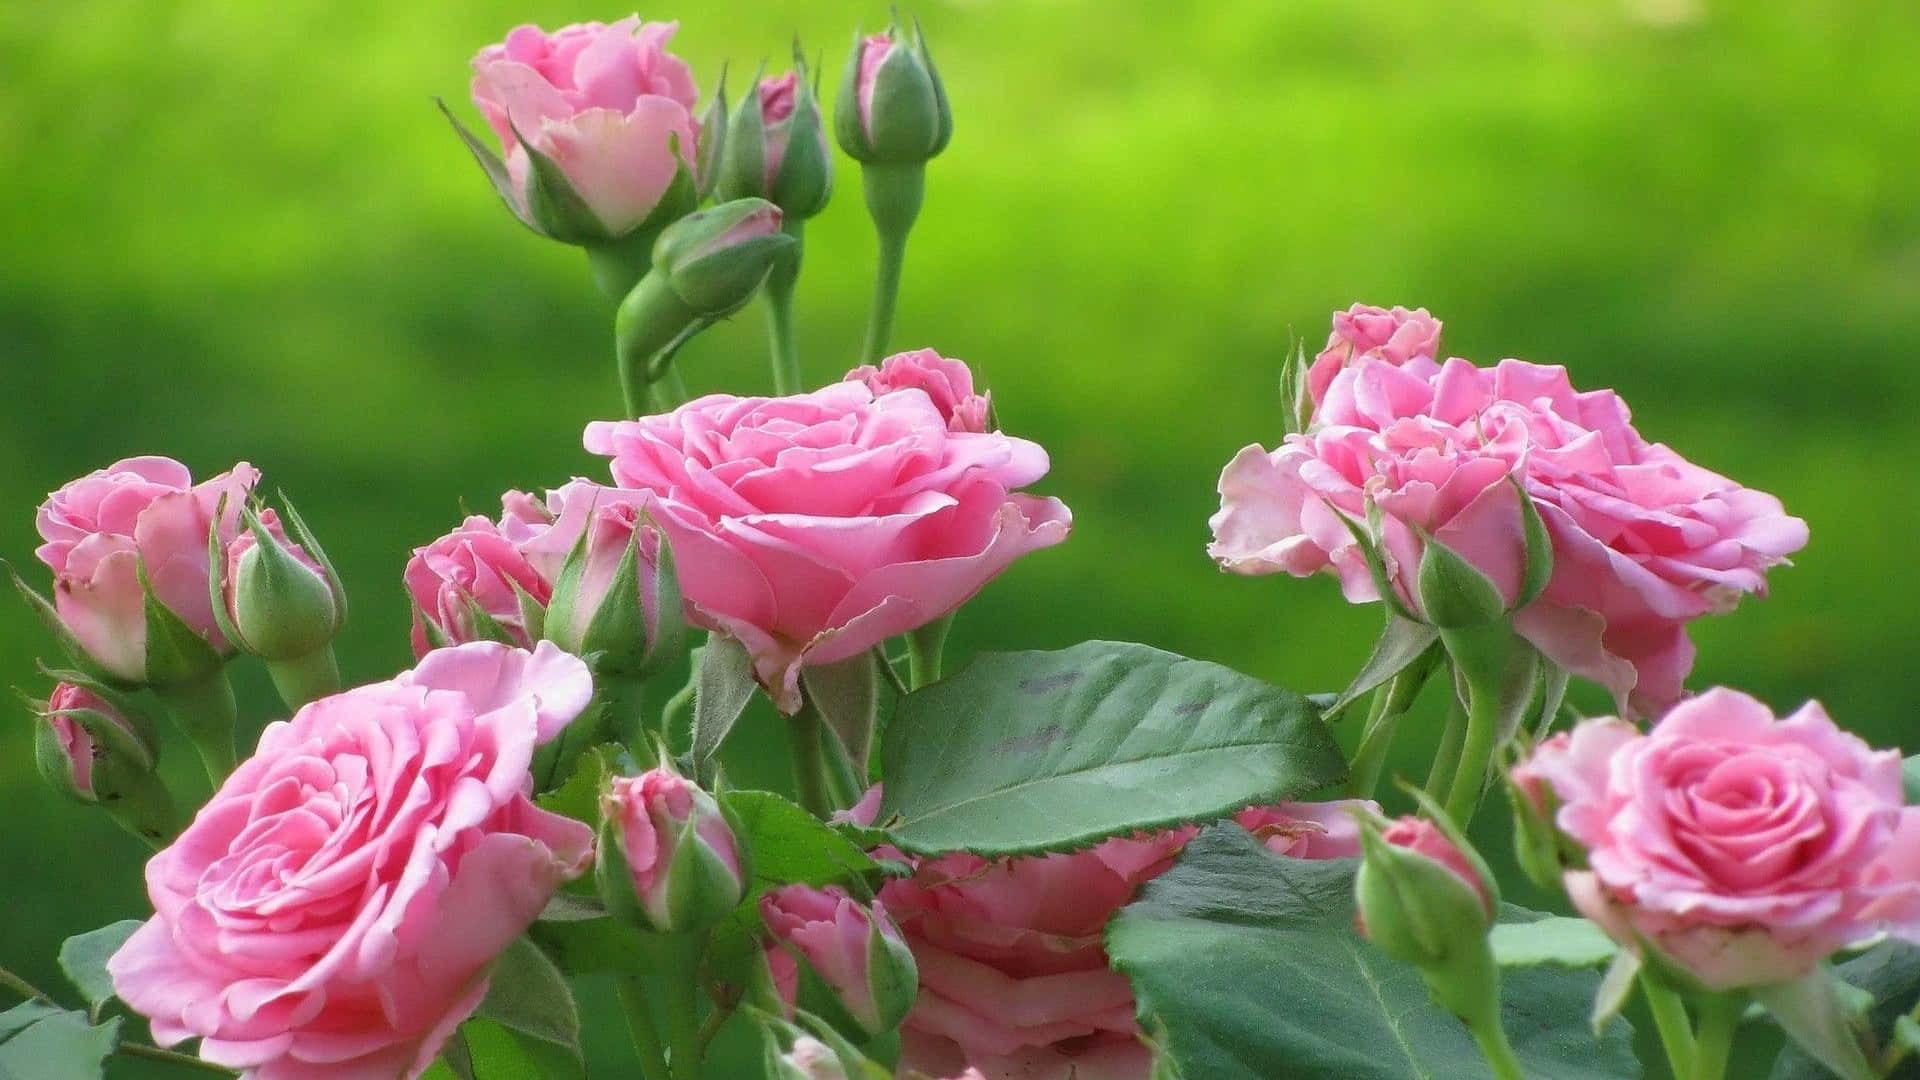 1080p Lively And Blossoming Pink Roses Background